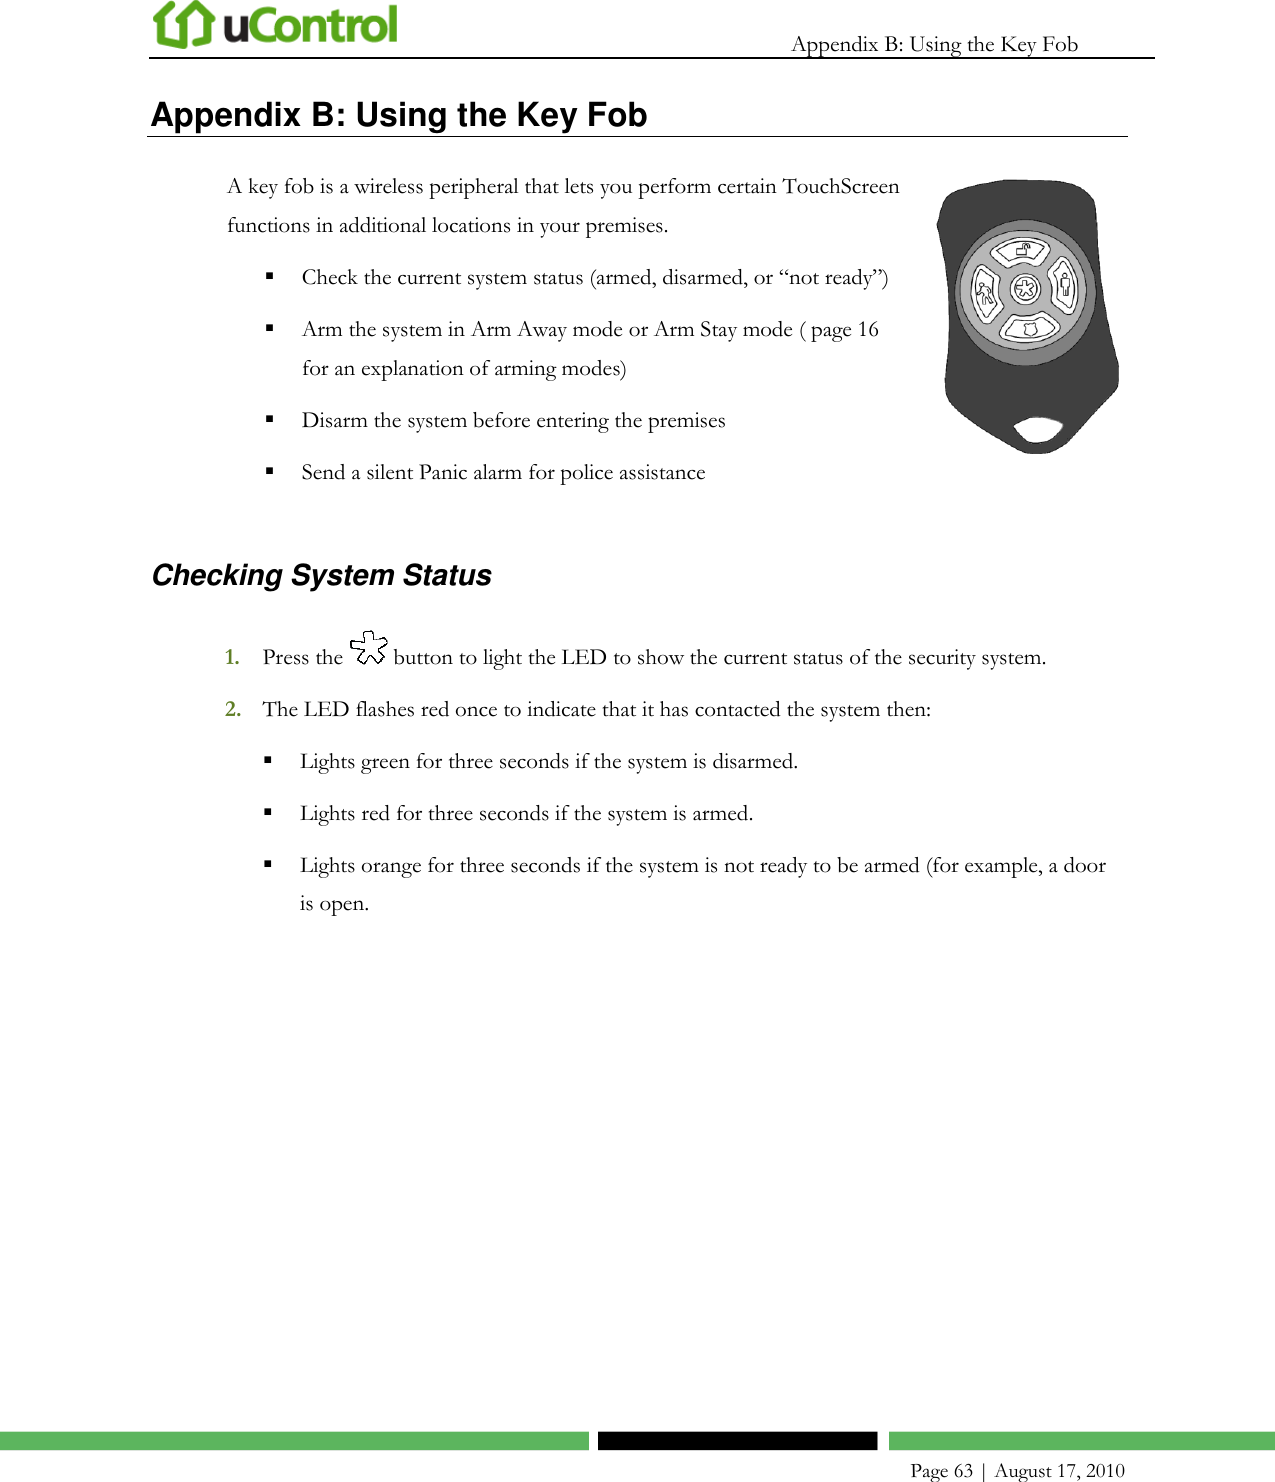   Appendix B: Using the Key Fob    Page 63 | August 17, 2010 Appendix B: Using the Key Fob A key fob is a wireless peripheral that lets you perform certain TouchScreen functions in additional locations in your premises.   Check the current system status (armed, disarmed, or ―not ready‖)  Arm the system in Arm Away mode or Arm Stay mode ( page 16 for an explanation of arming modes)  Disarm the system before entering the premises  Send a silent Panic alarm for police assistance   Checking System Status 1. Press the   button to light the LED to show the current status of the security system. 2. The LED flashes red once to indicate that it has contacted the system then:  Lights green for three seconds if the system is disarmed.  Lights red for three seconds if the system is armed.  Lights orange for three seconds if the system is not ready to be armed (for example, a door is open. 